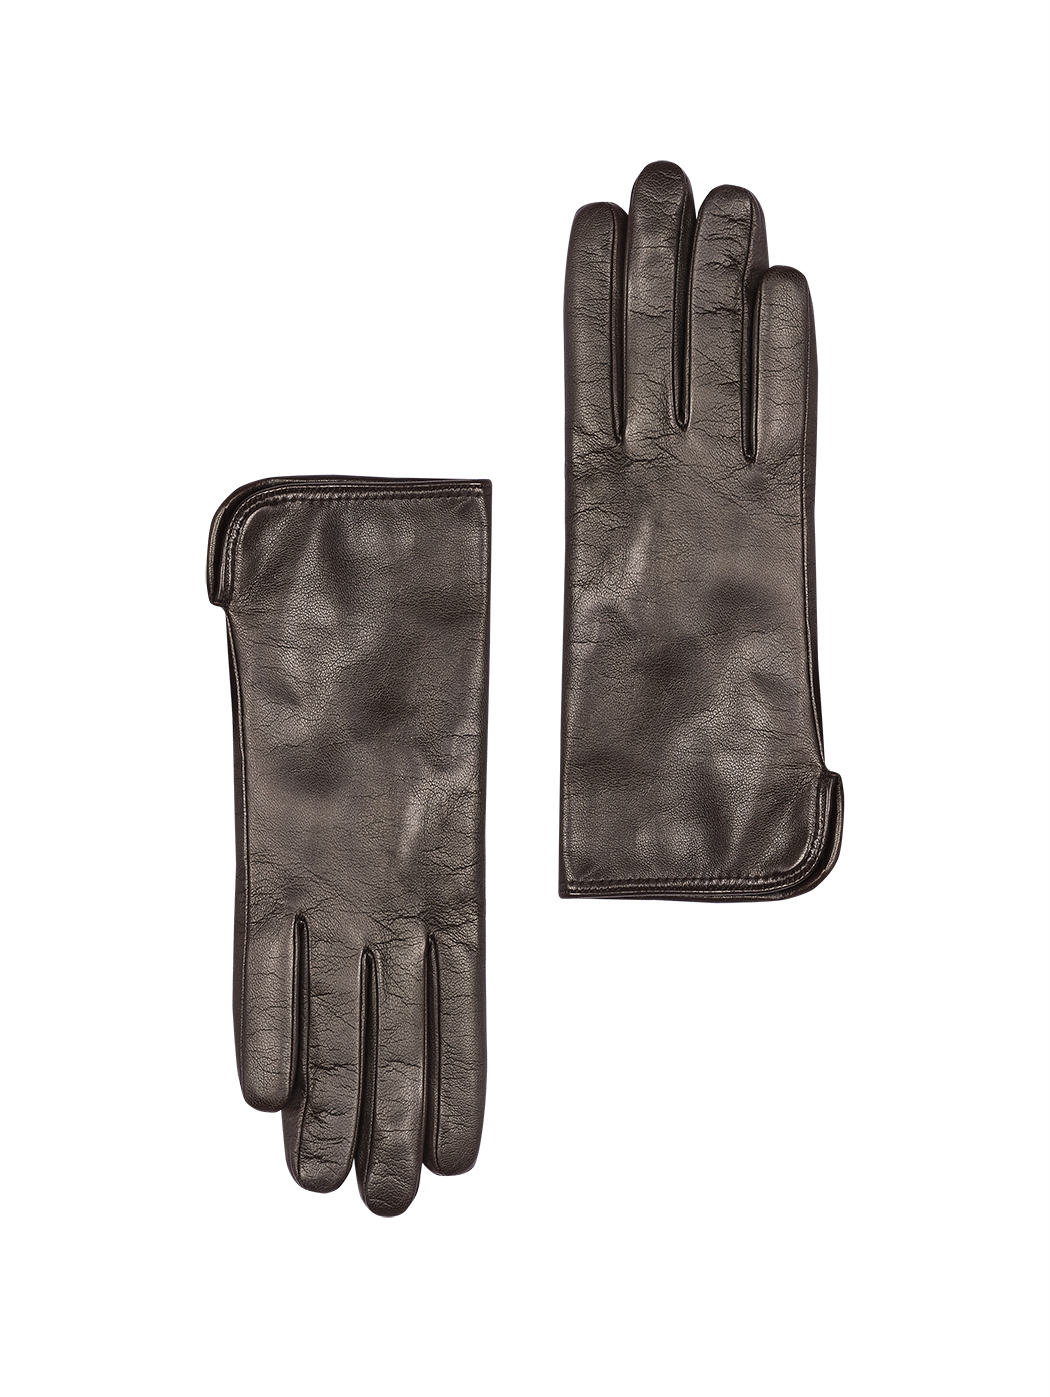 Women's Cashmere Lined Gloves in Leather Dark brown